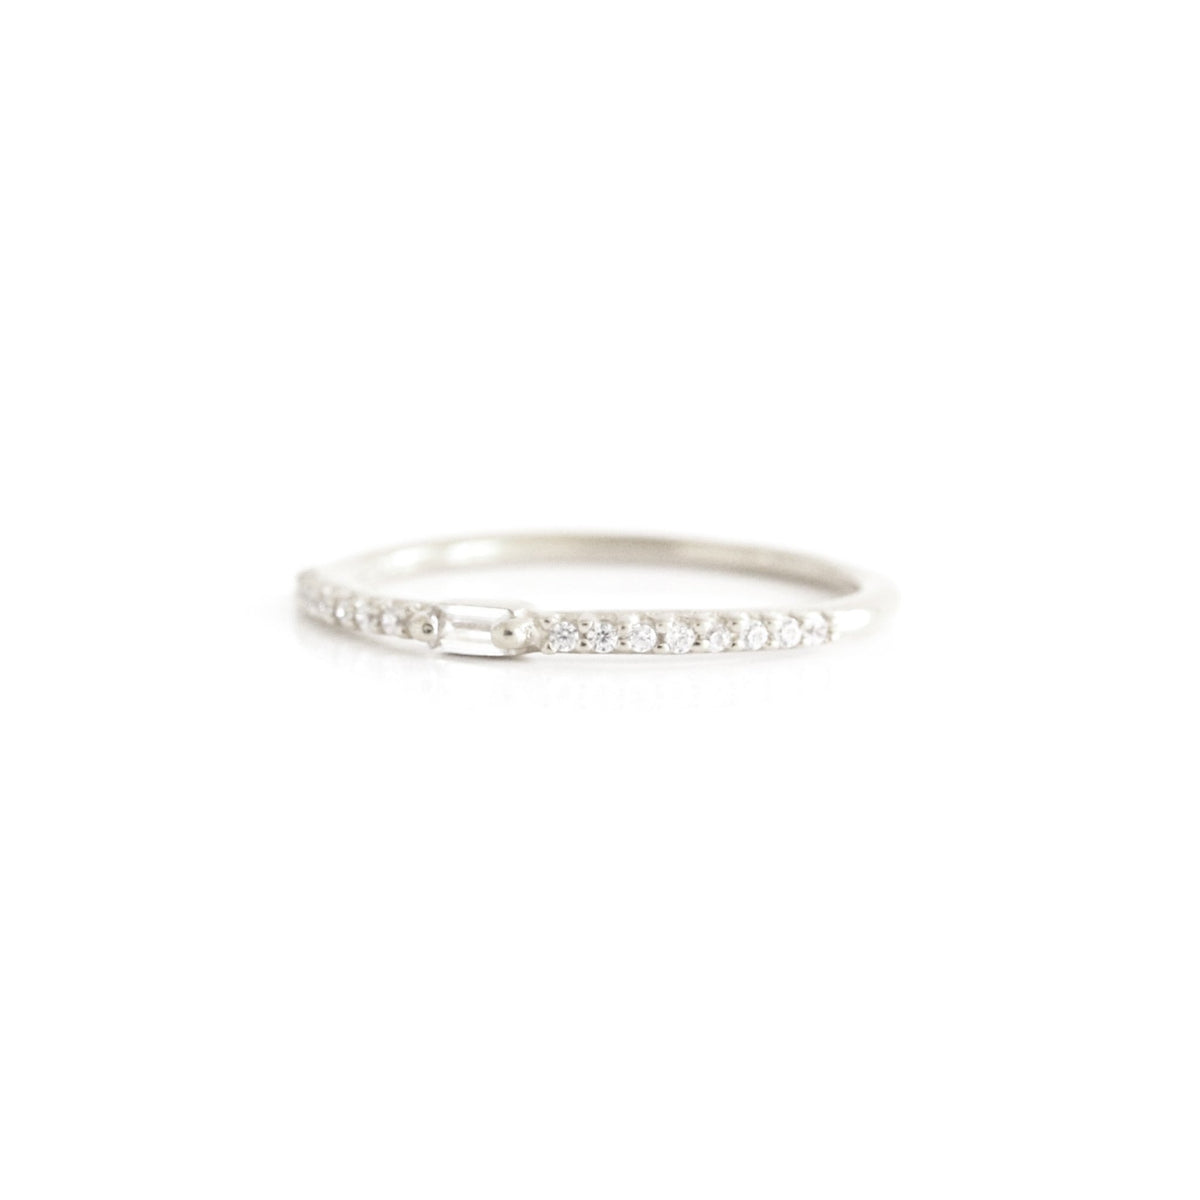 Loyal Prism Stacking Ring - White Topaz &amp; Silver - SO PRETTY CARA COTTER